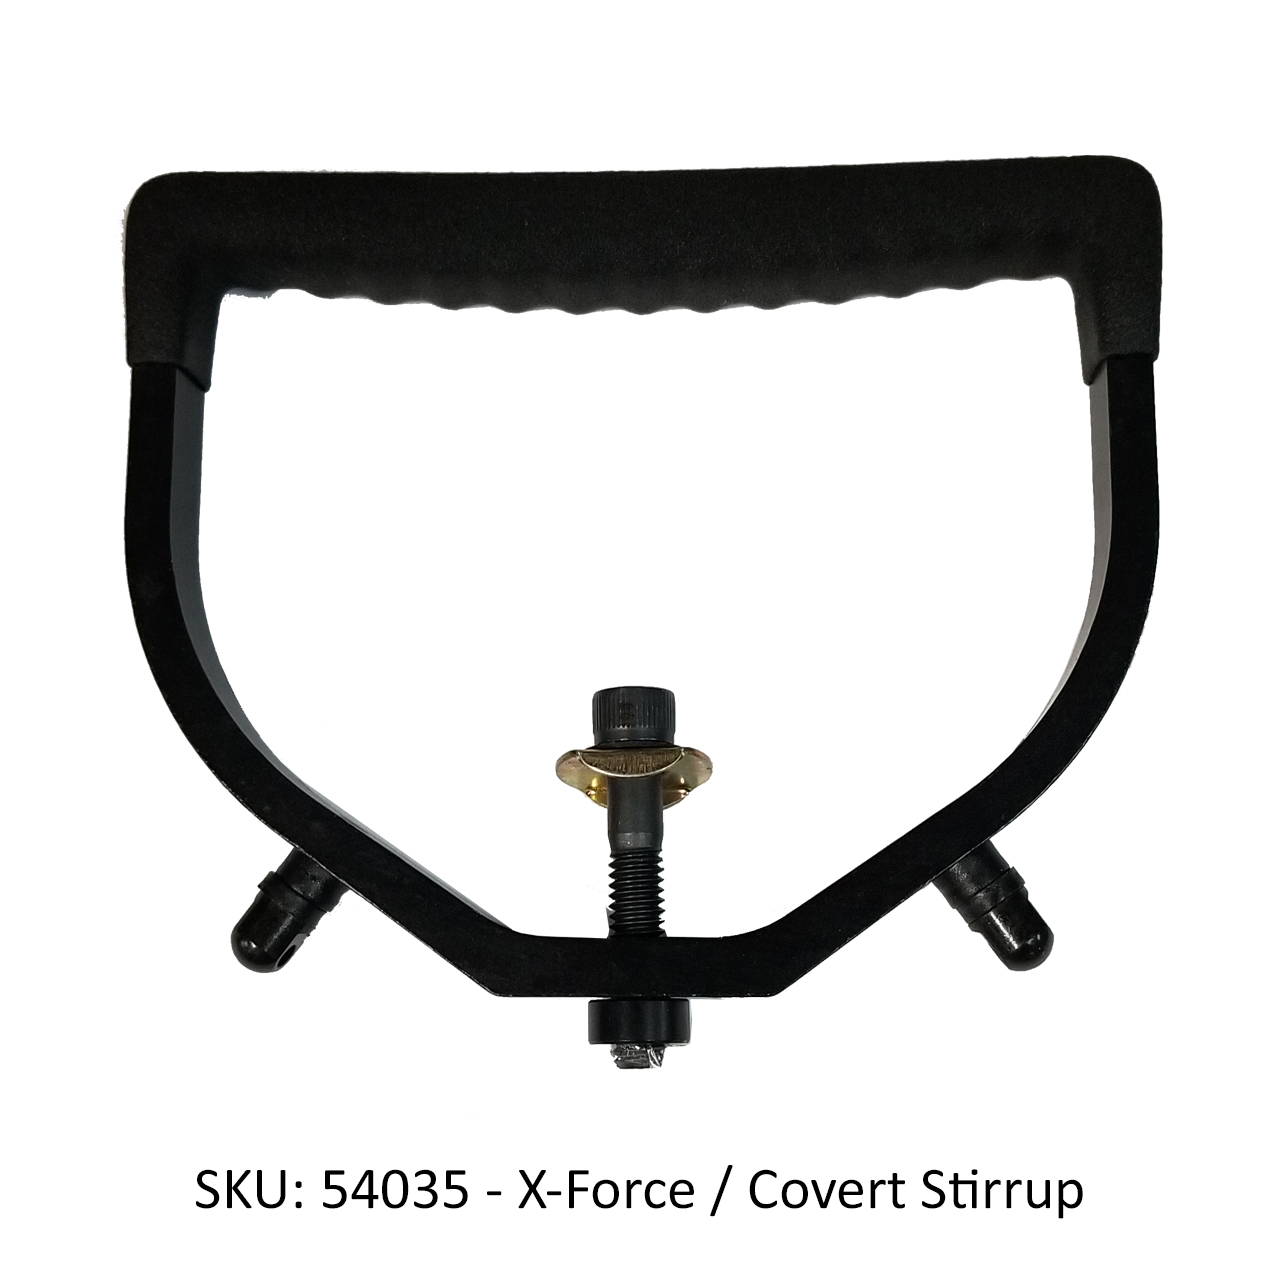 CX Crossbow Replacement Stirrups